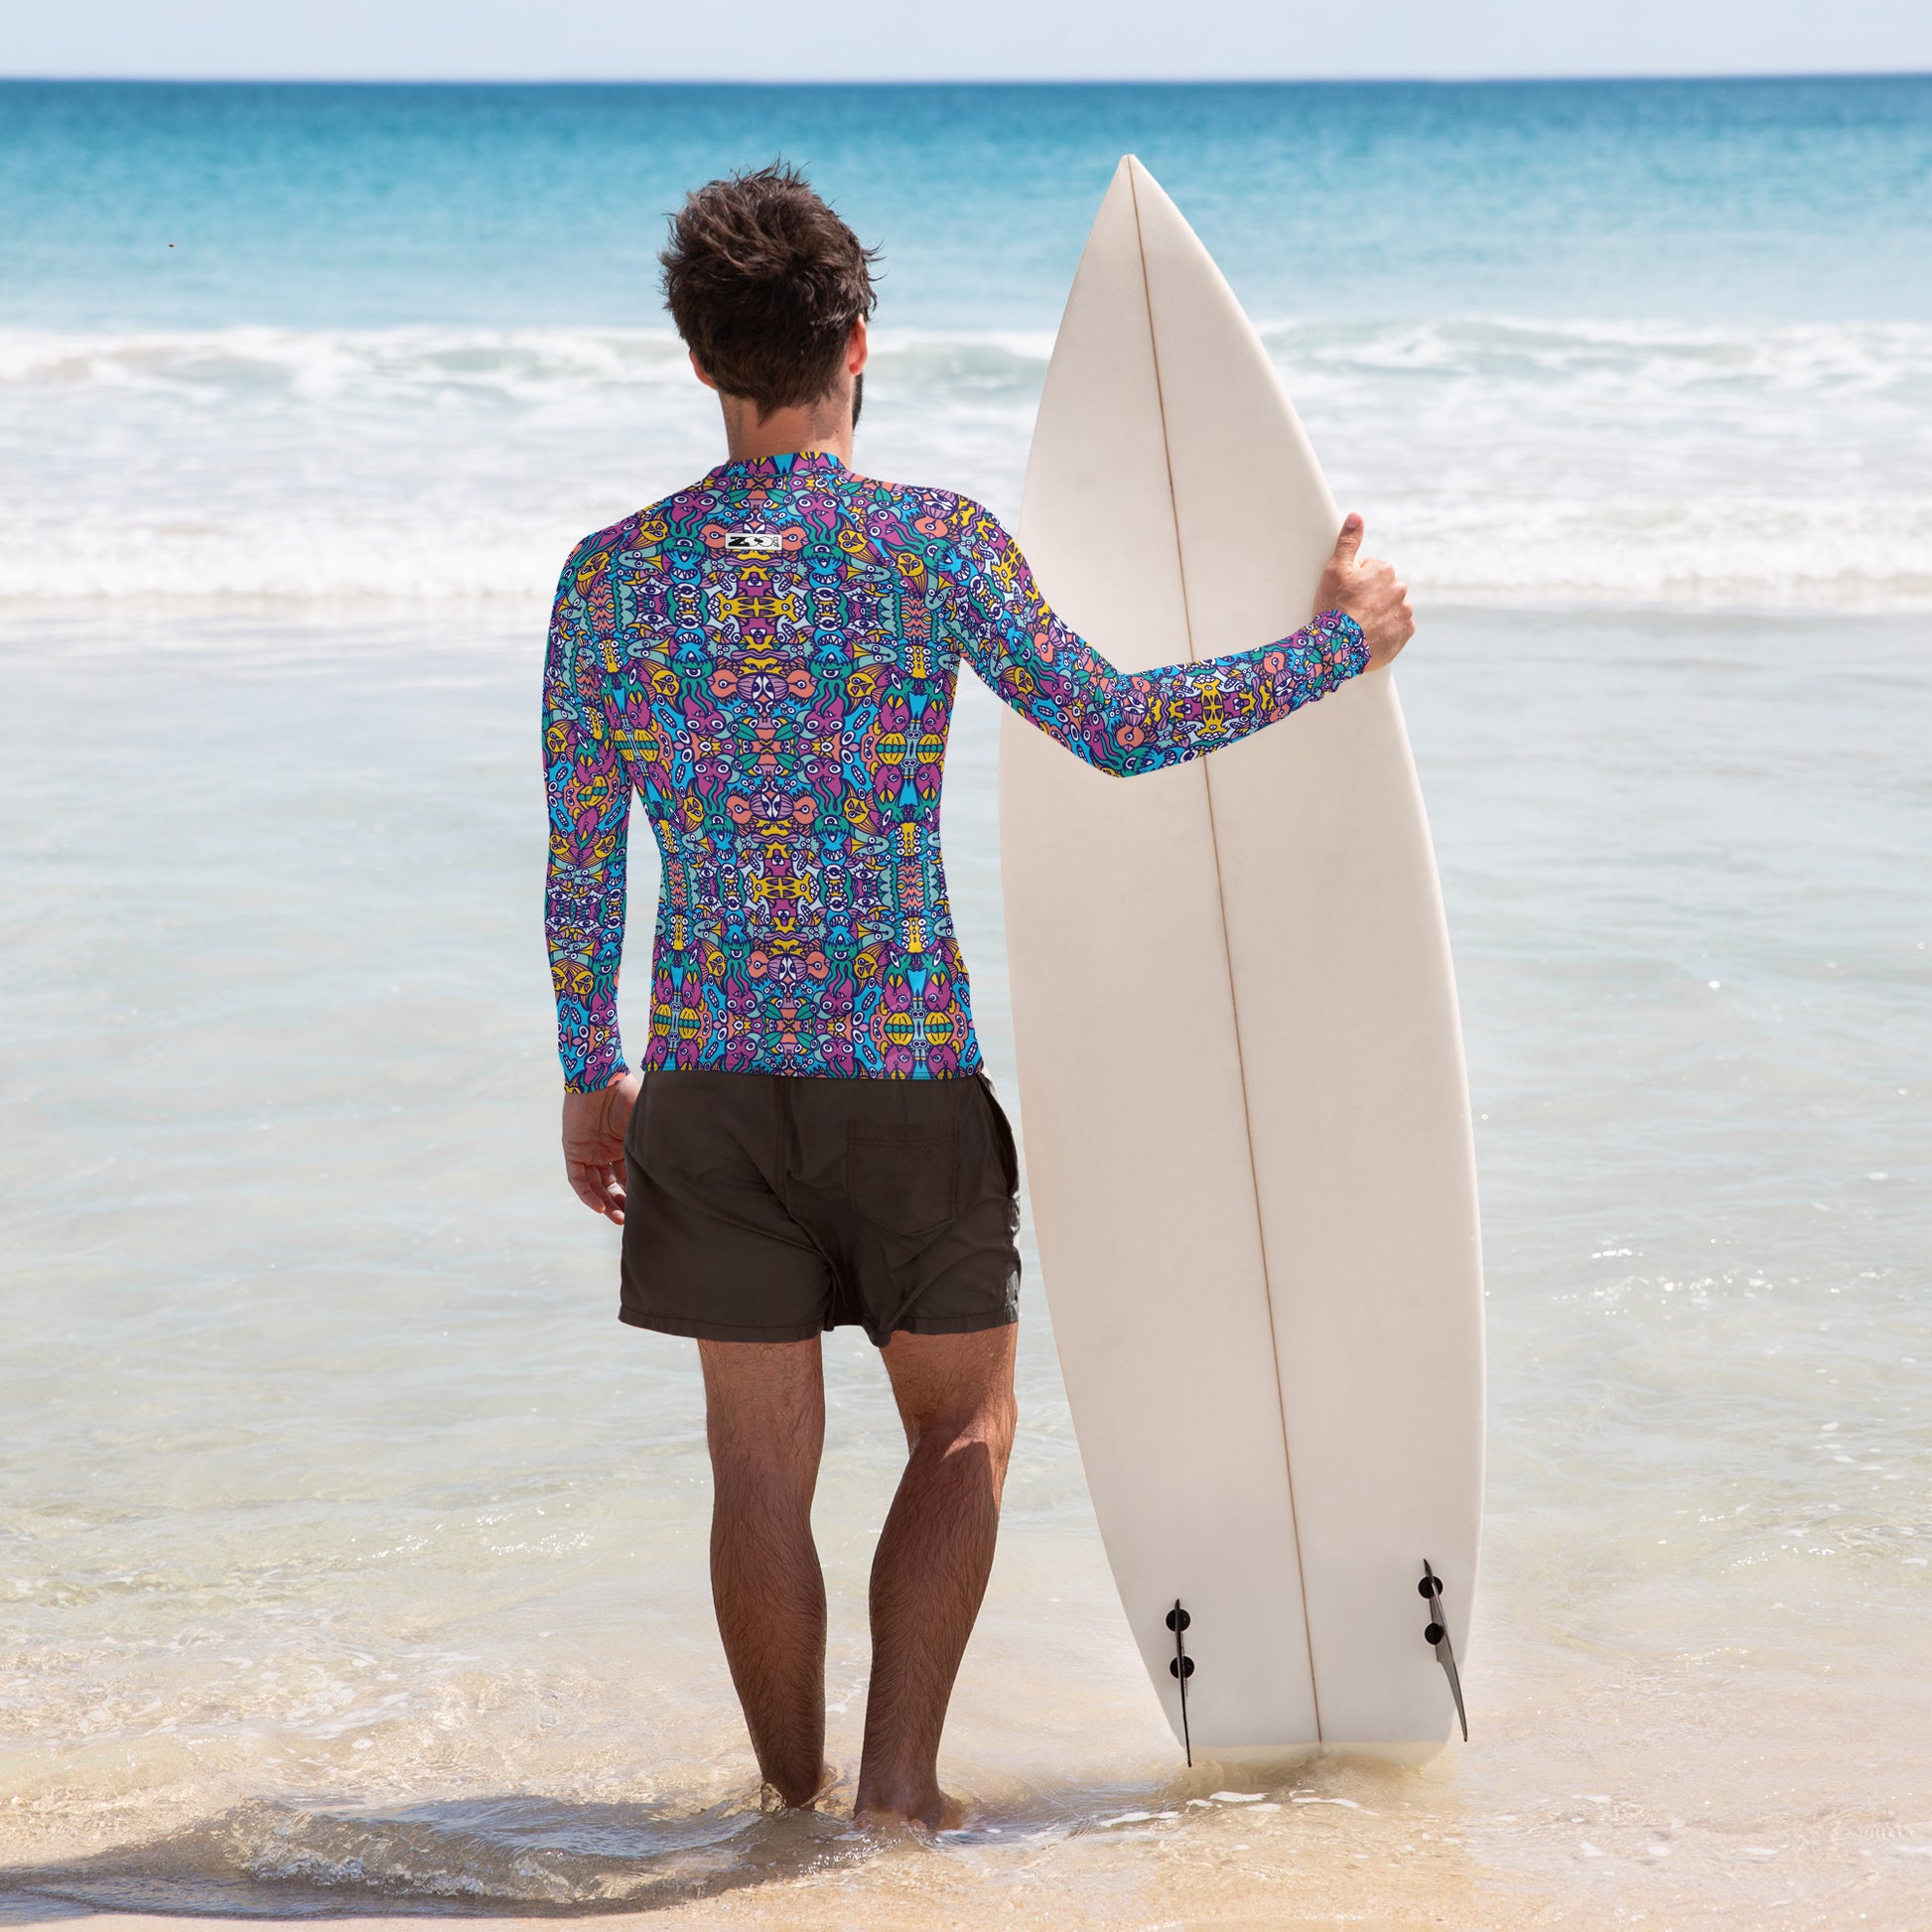 Whimsical design featuring multicolor critters from another world Men's Rash Guard. Surfer lifestyle